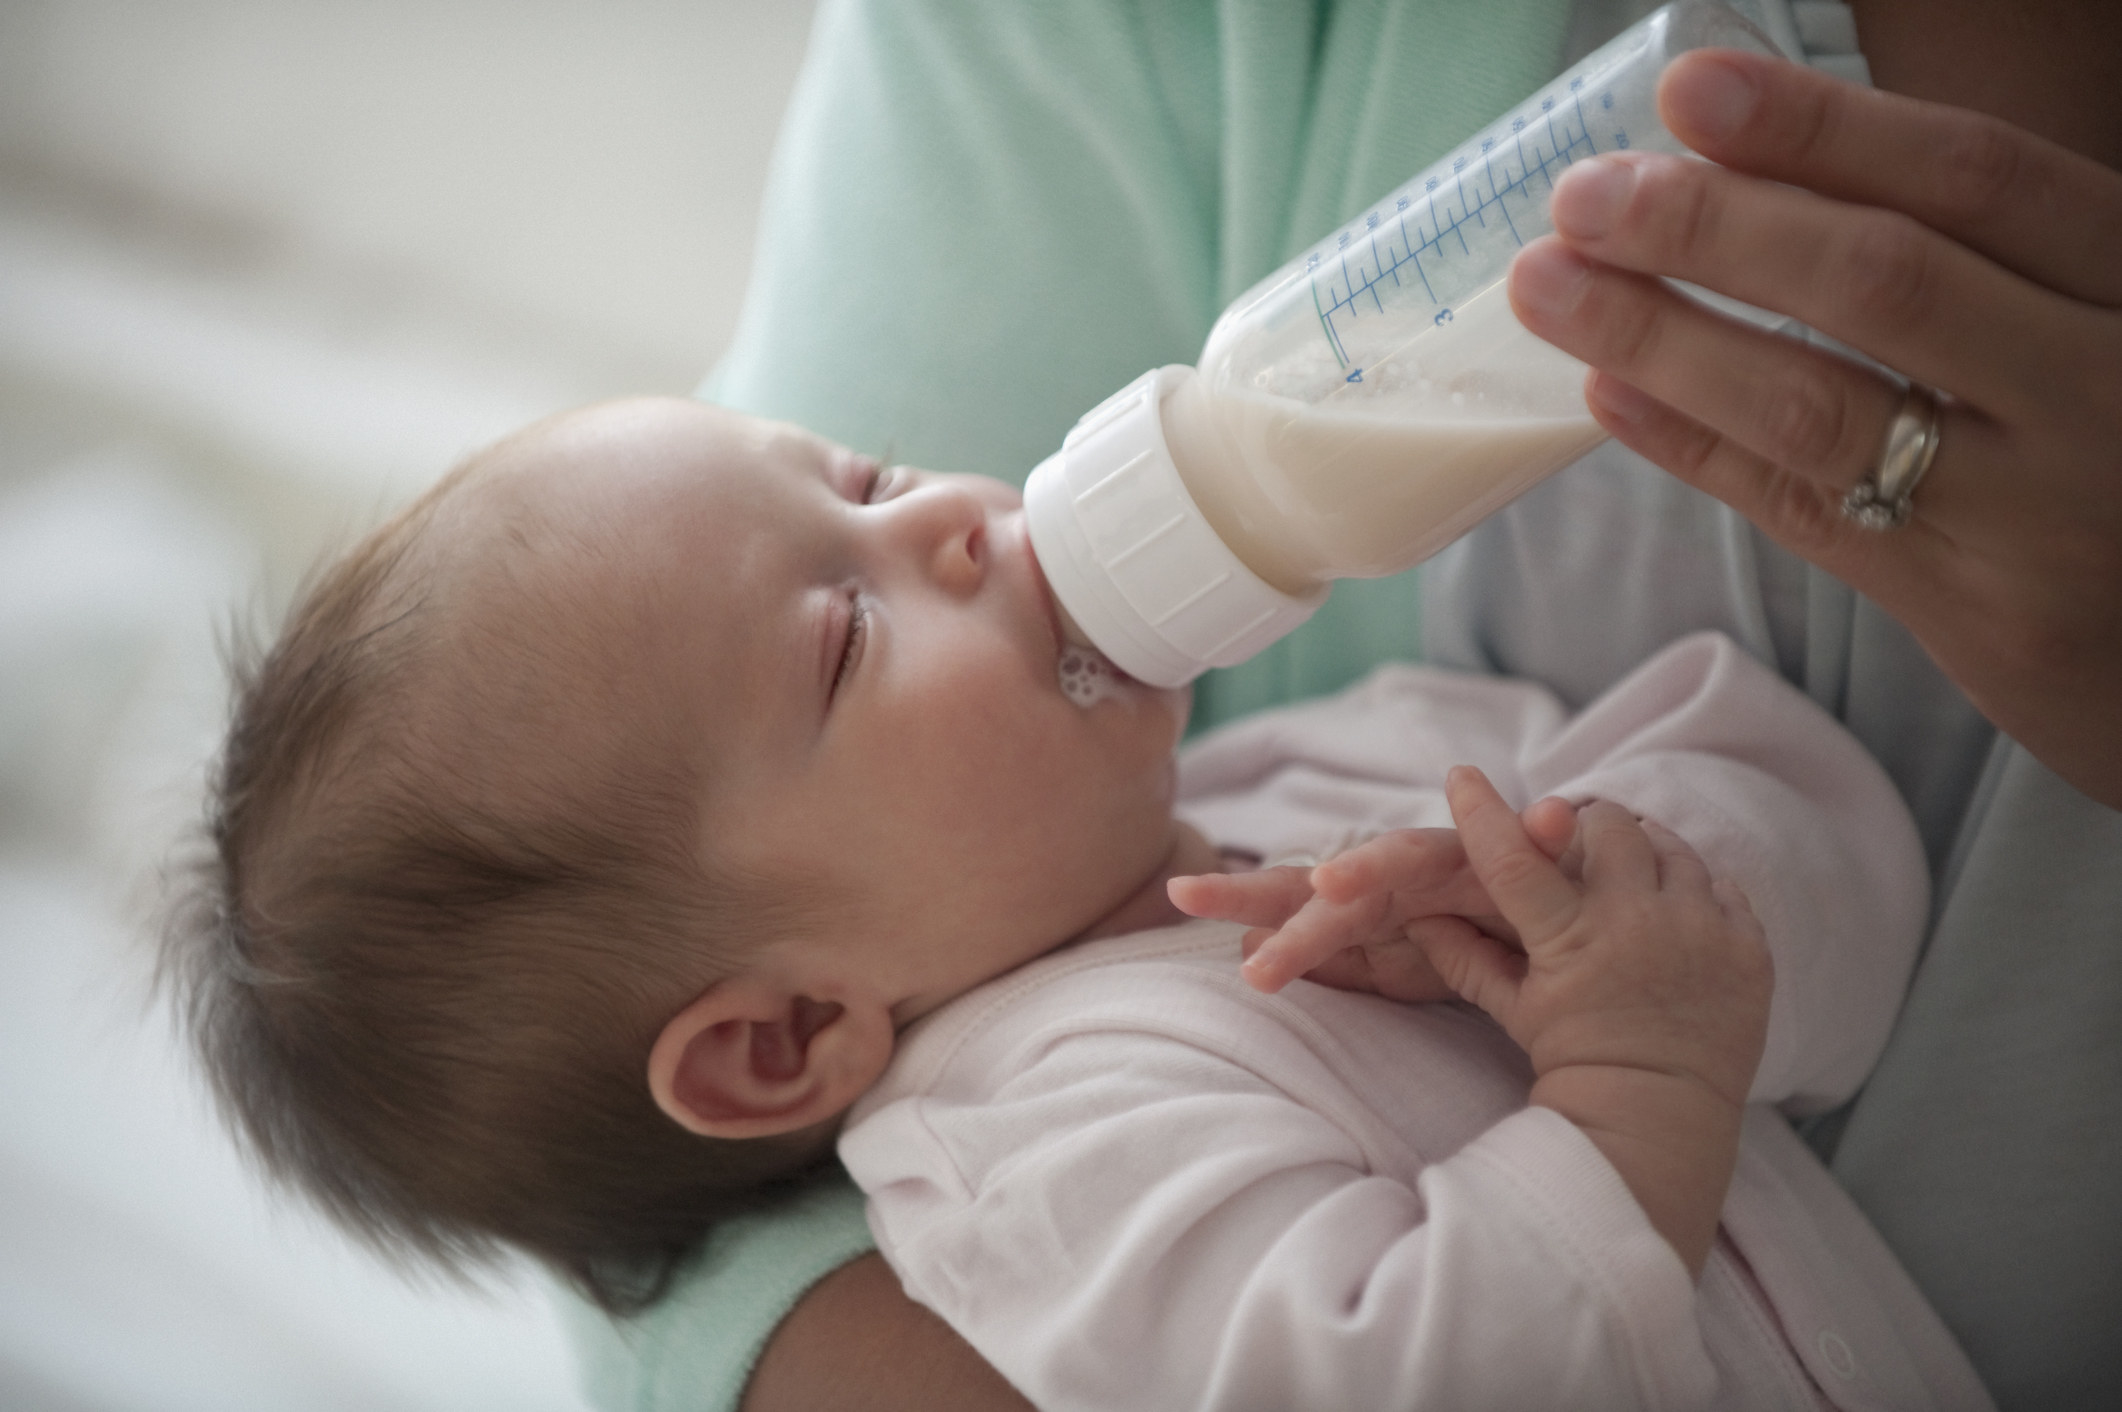 A parent feeding their baby with a bottle